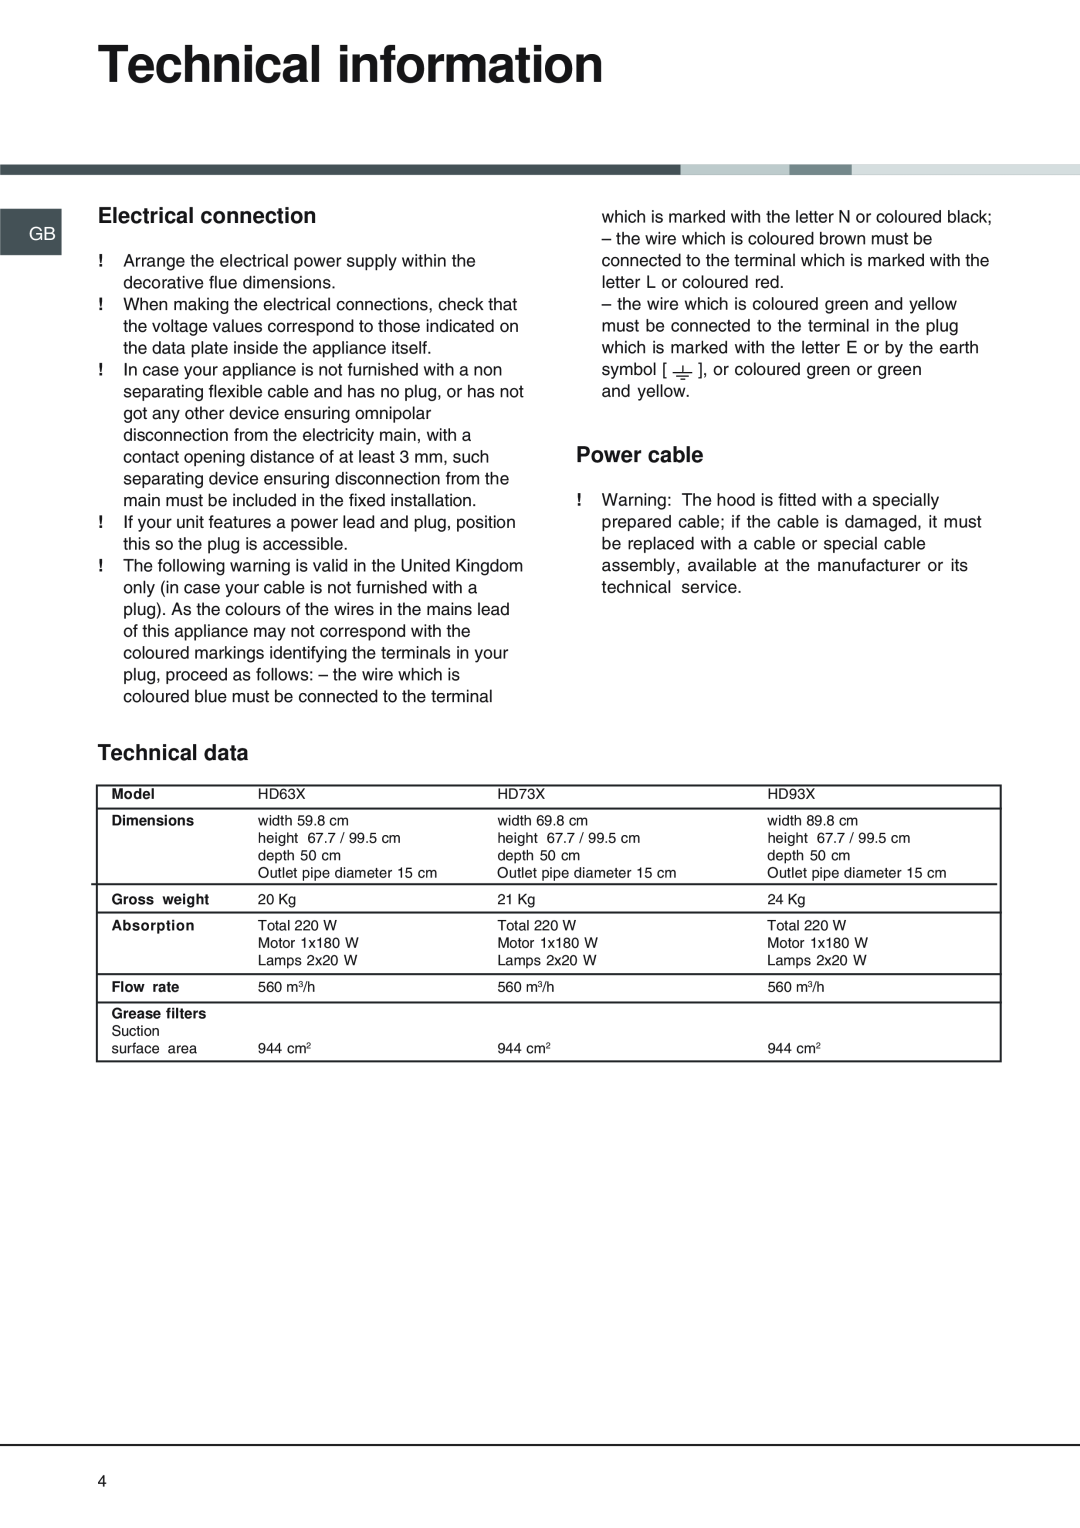 Hotpoint HD 93 X manual Technical information, Electrical connection, Power cable, Technical data 